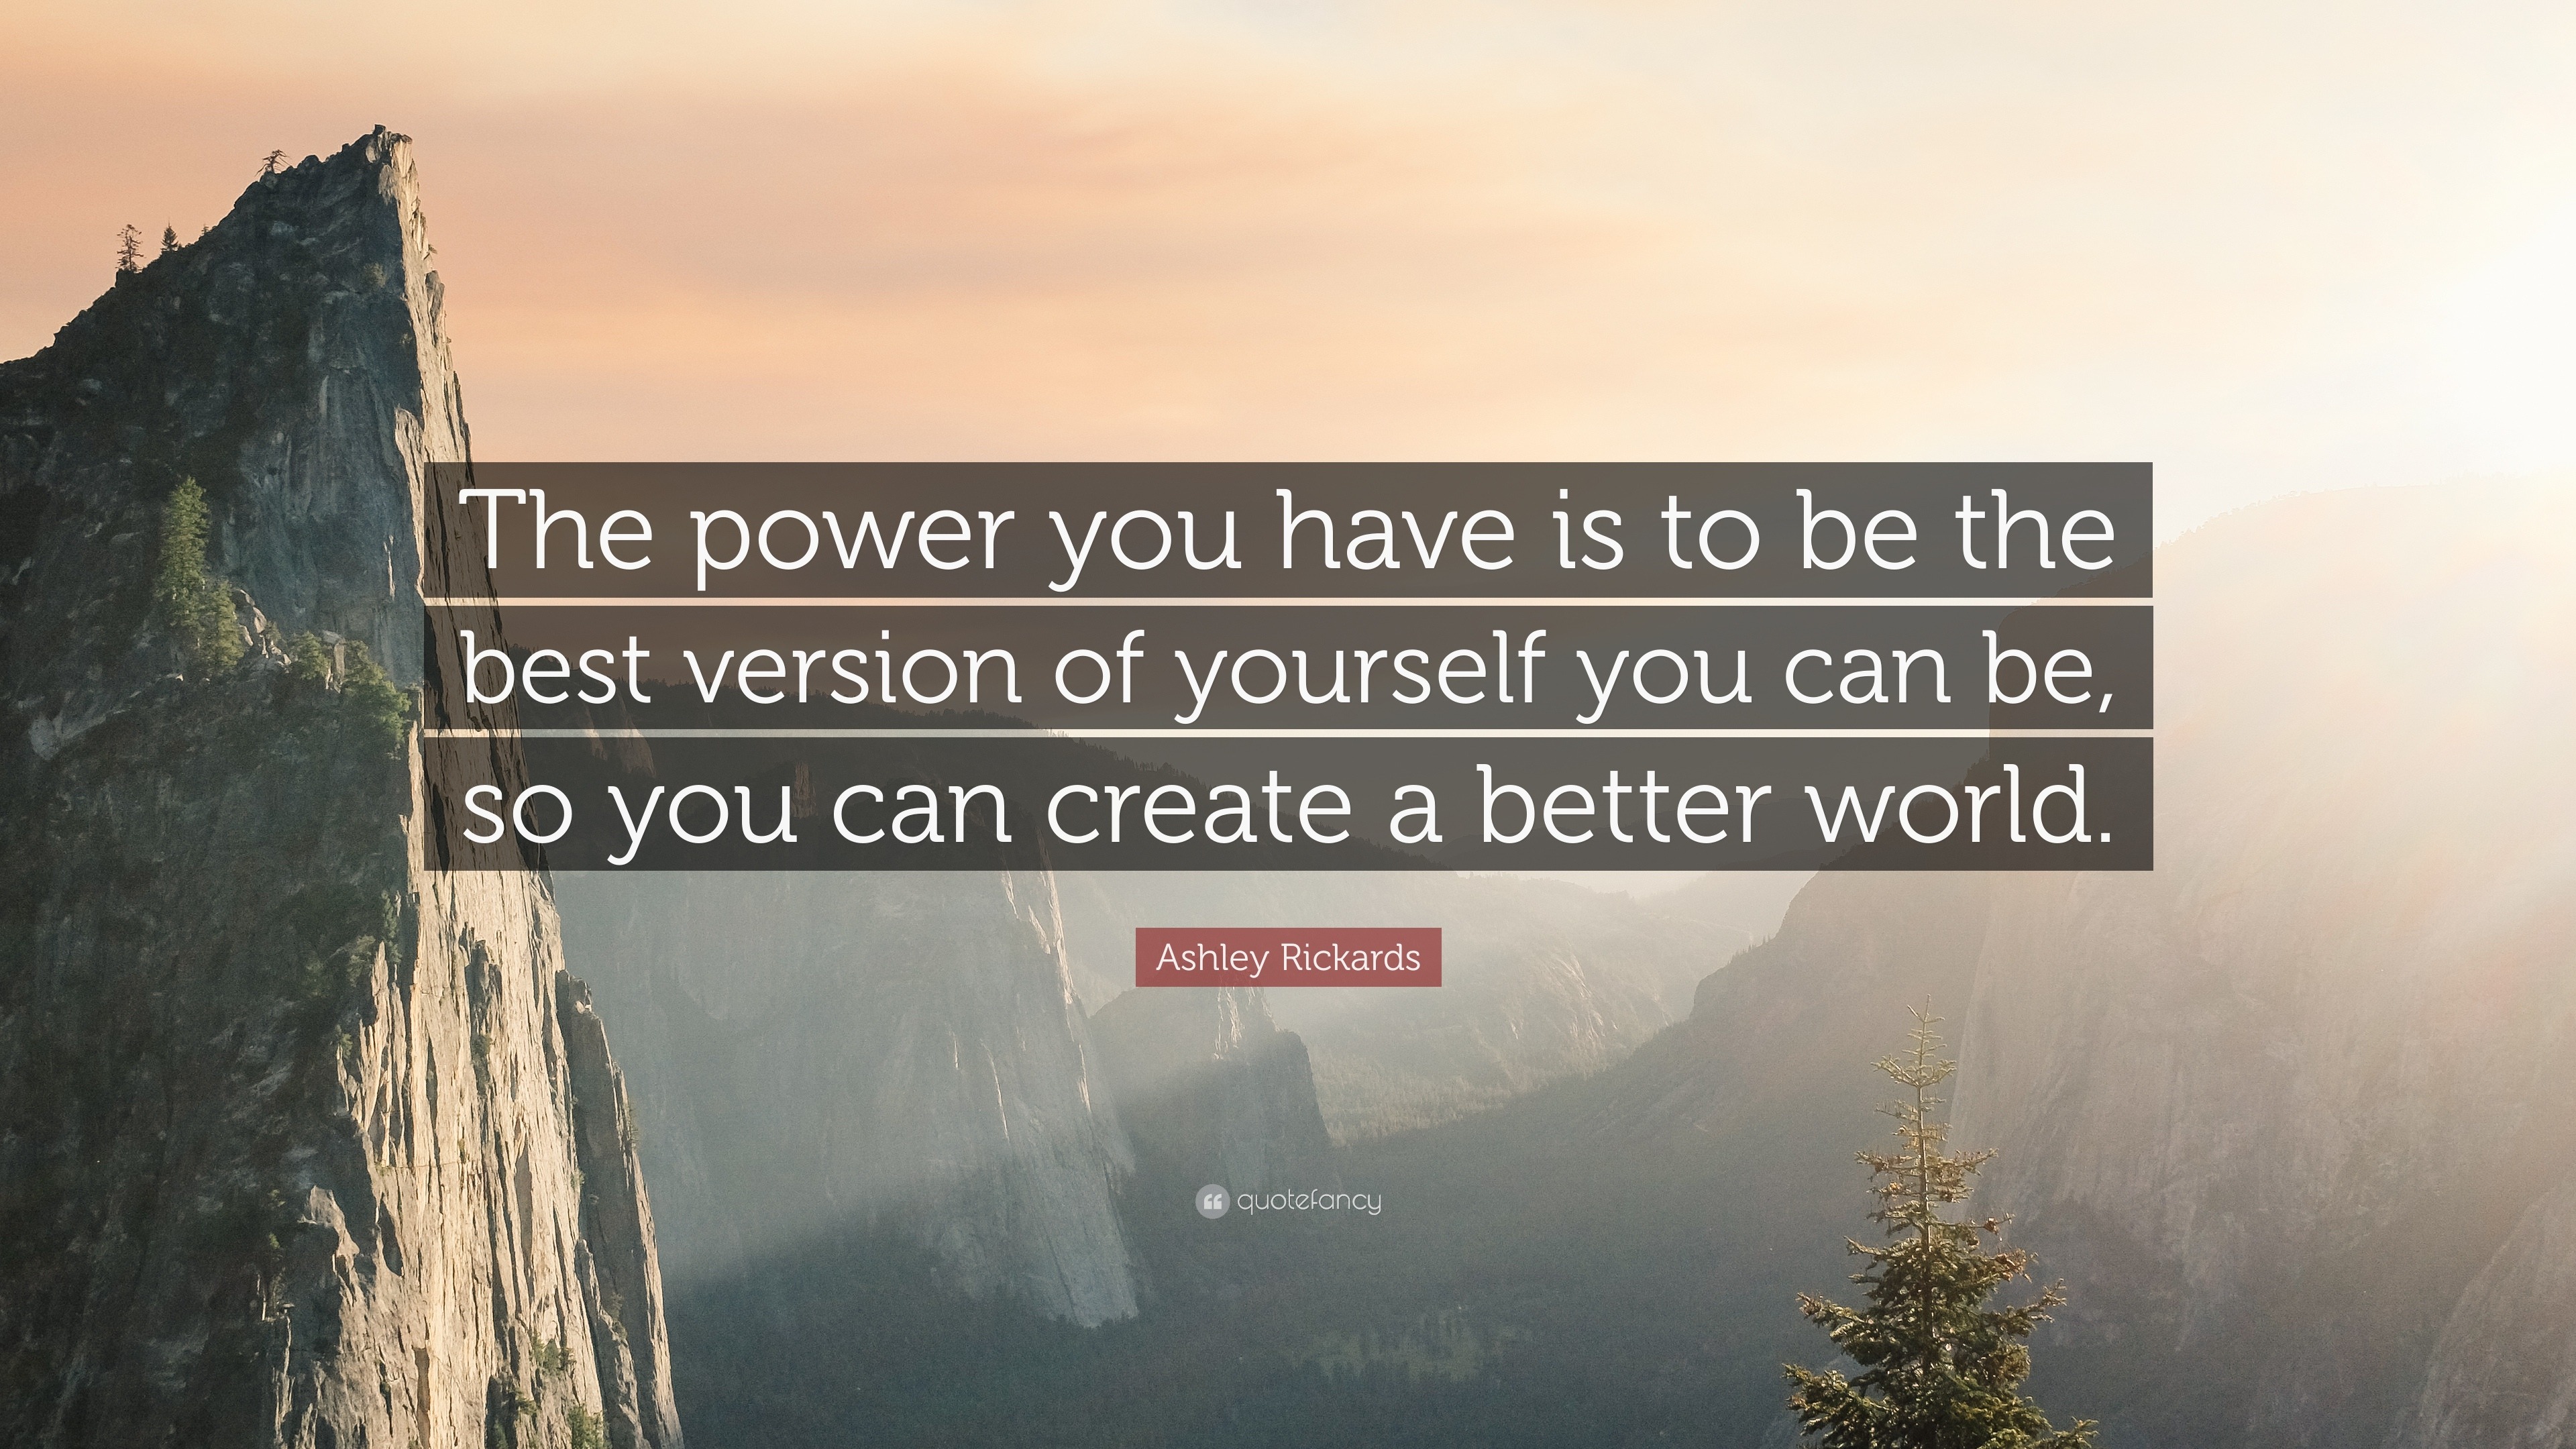 Ashley Rickards Quote The Power You Have Is To Be The Best Version Of Yourself You Can Be So You Can Create A Better World 7 Wallpapers Quotefancy